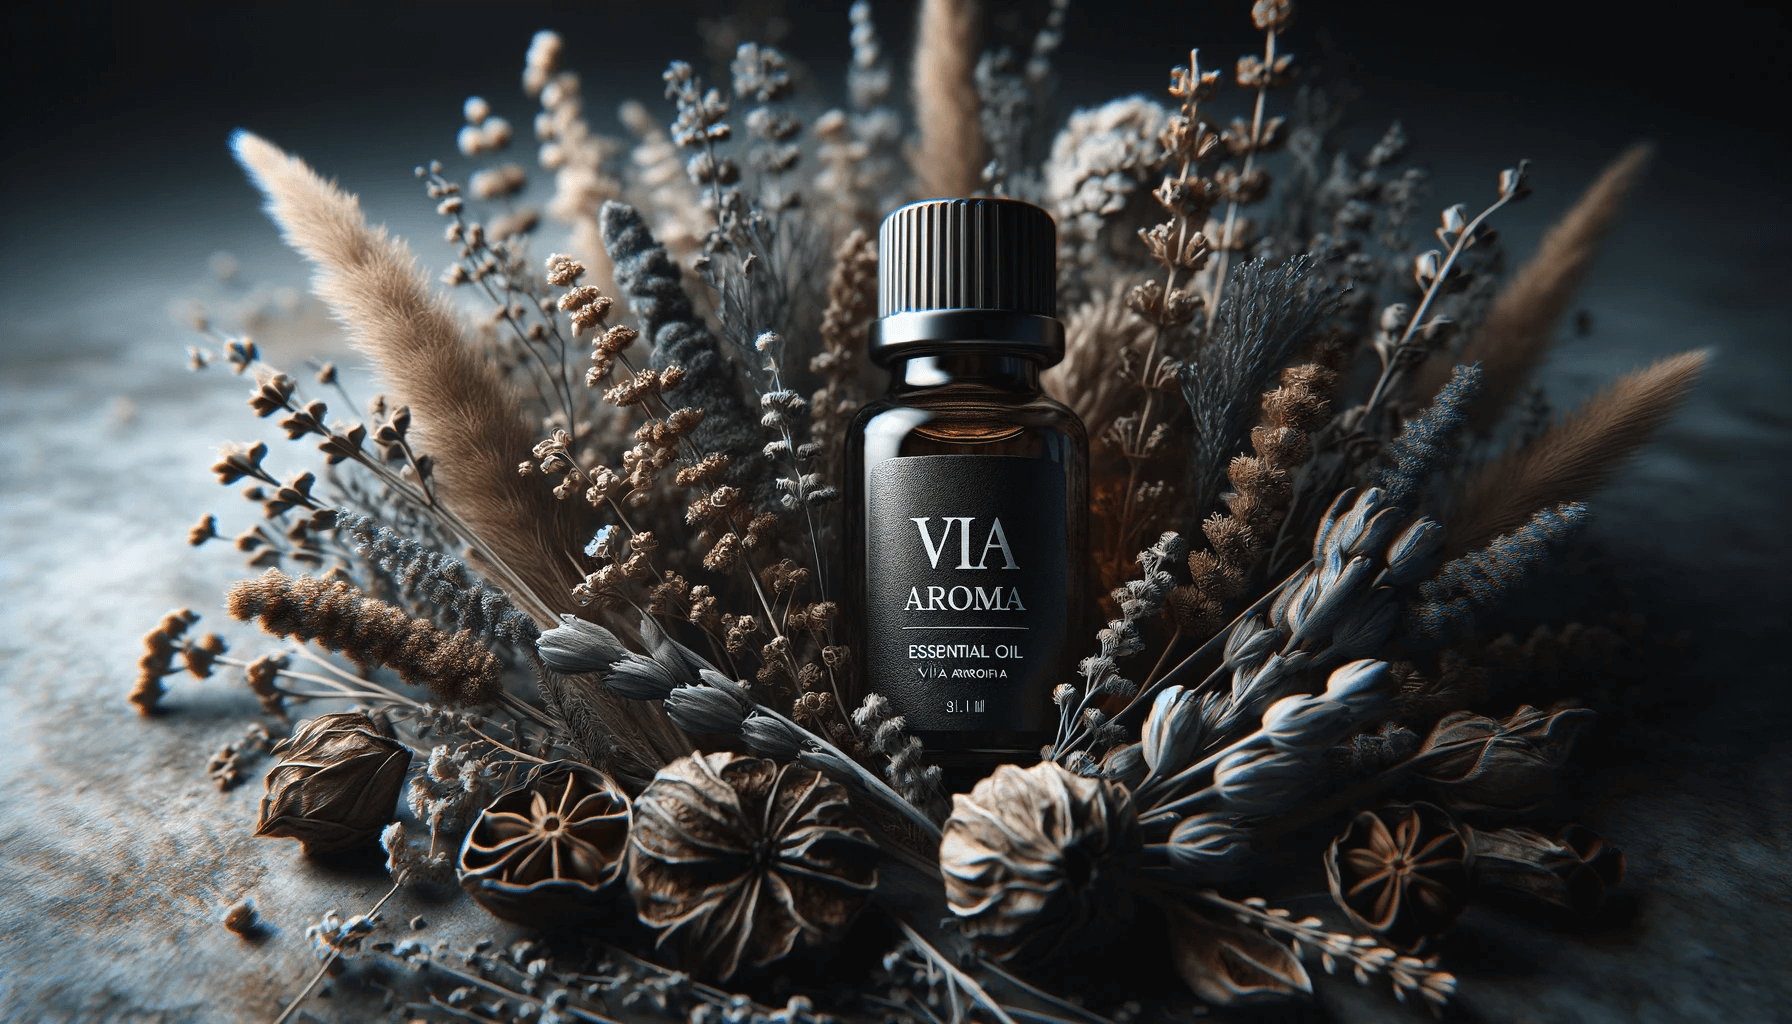 DALL·E 2024 01 18 14.07.57 Create a photorealistic image of an essential oil bottle nestled among dried botanicals. The label on the bottle is clearly branded with Via Aroma.